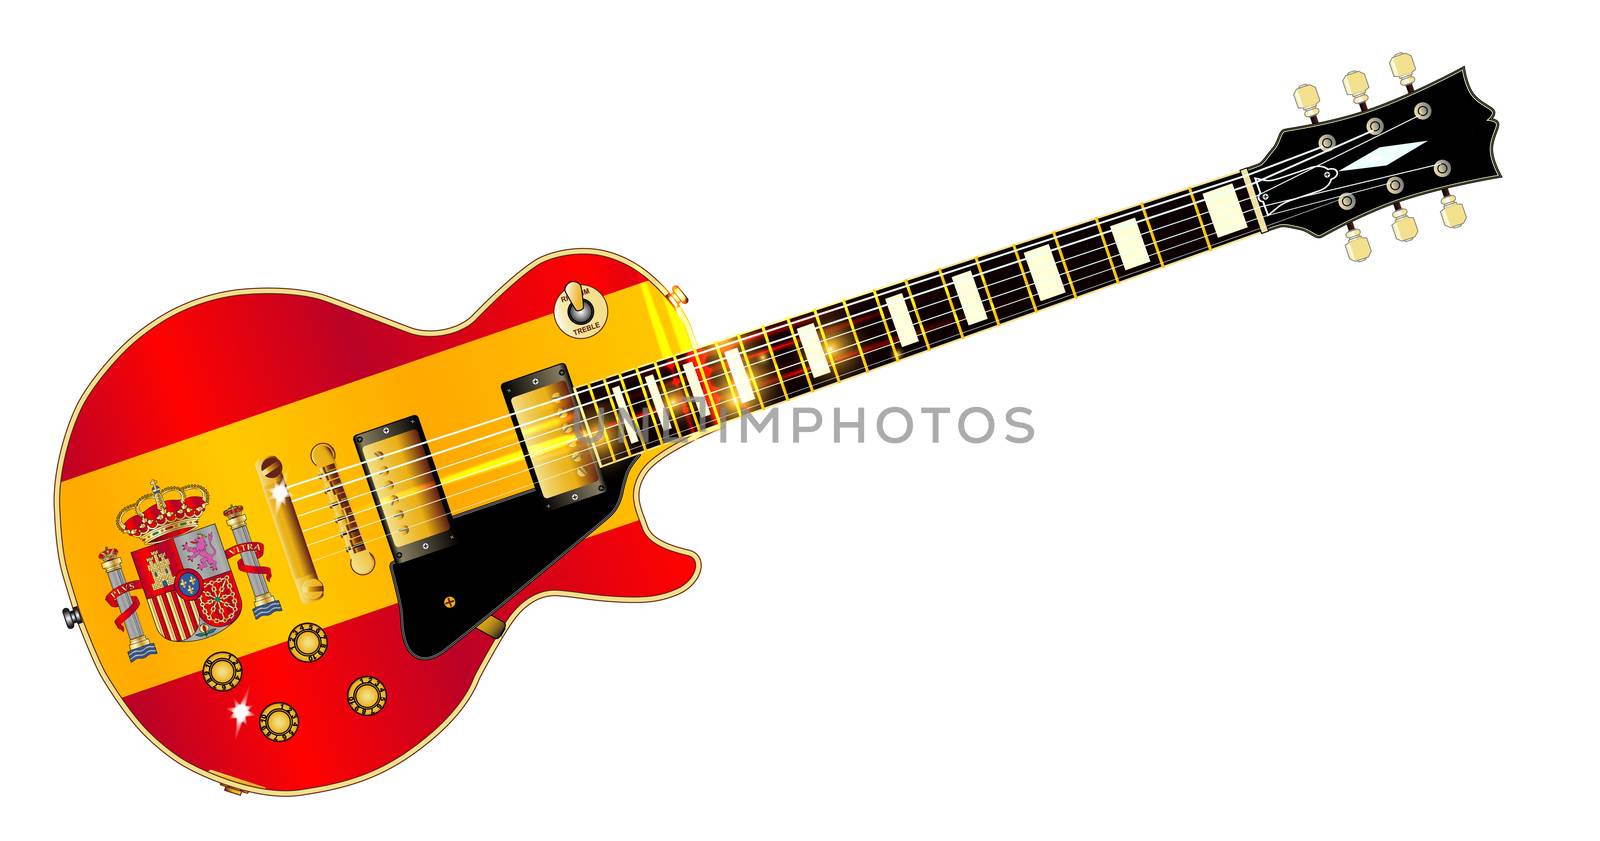 The definitive rock and roll guitar with the Spanish flag isolated over a white background.